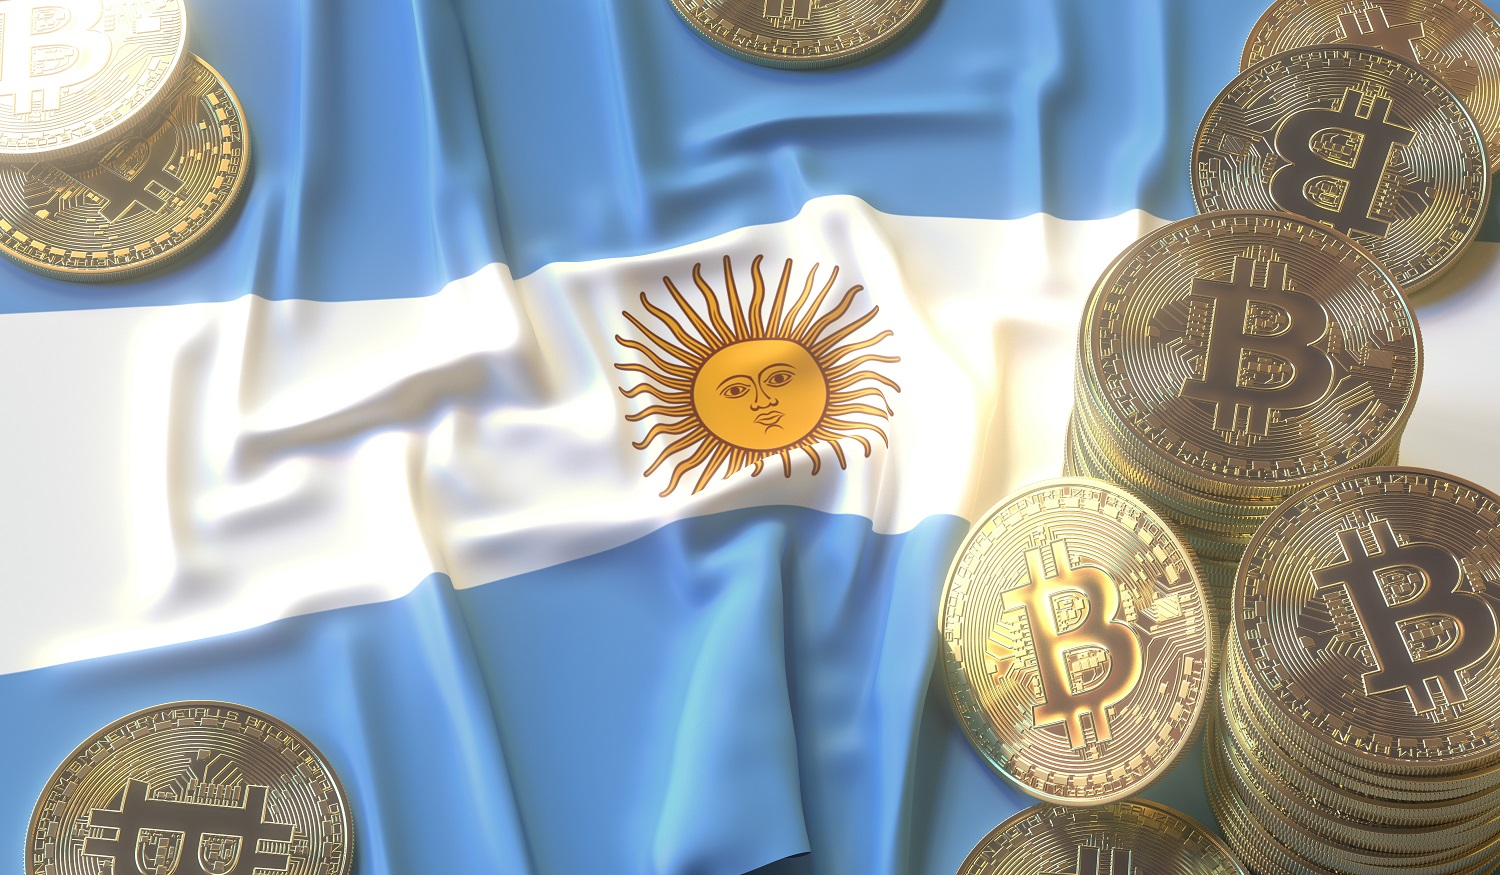 Metal tokens intended to represent Bitcoin on Argentina’s national flag.